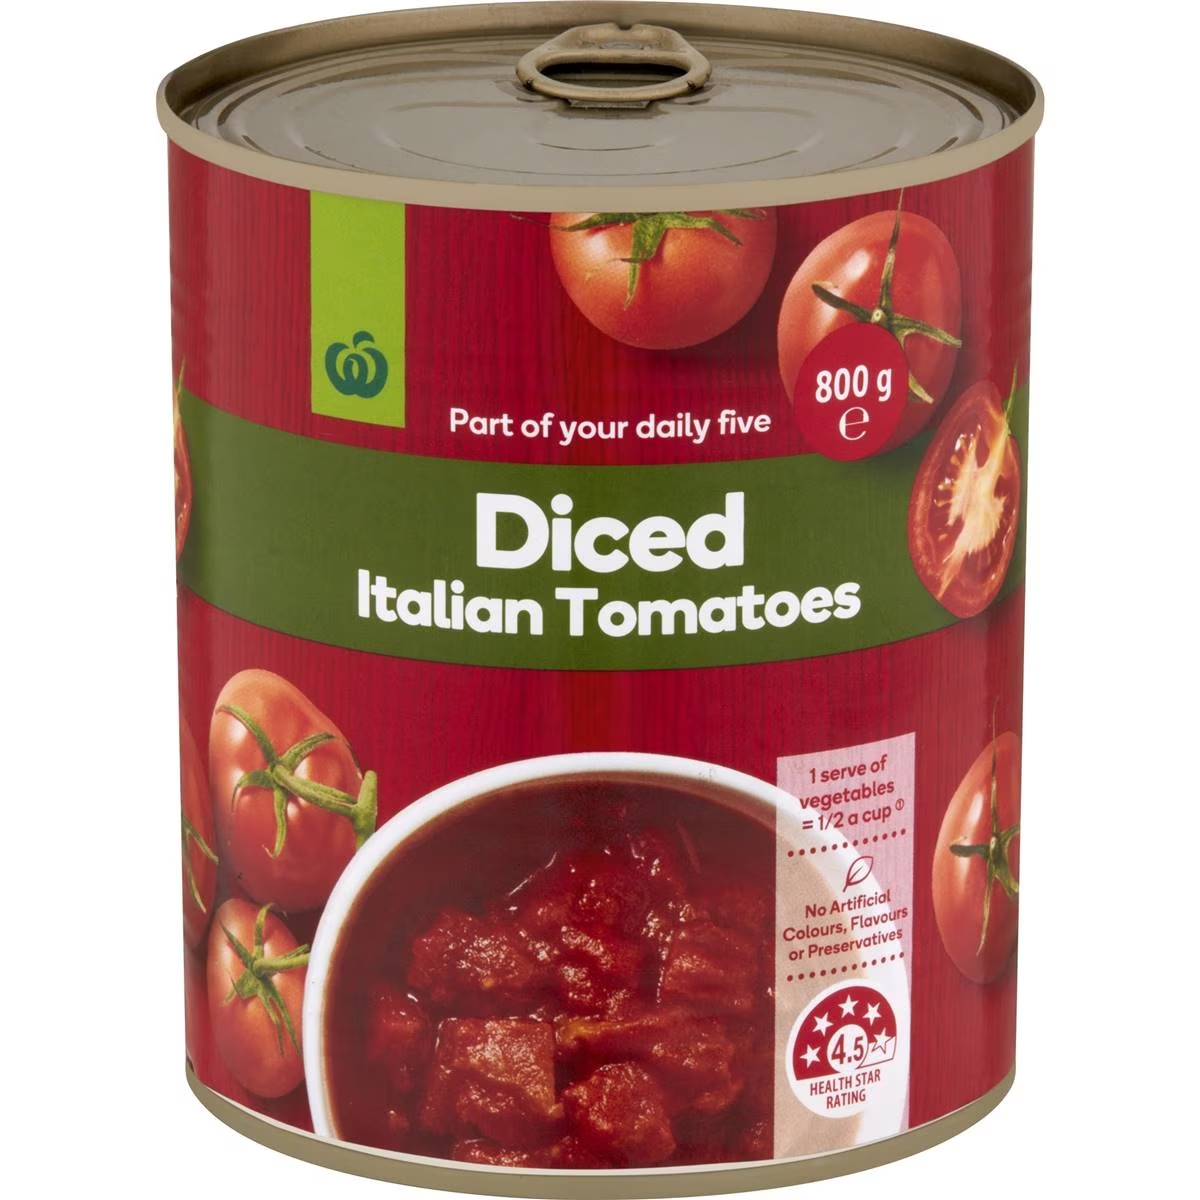 Woolworths Diced Italian Tomatoes 800g